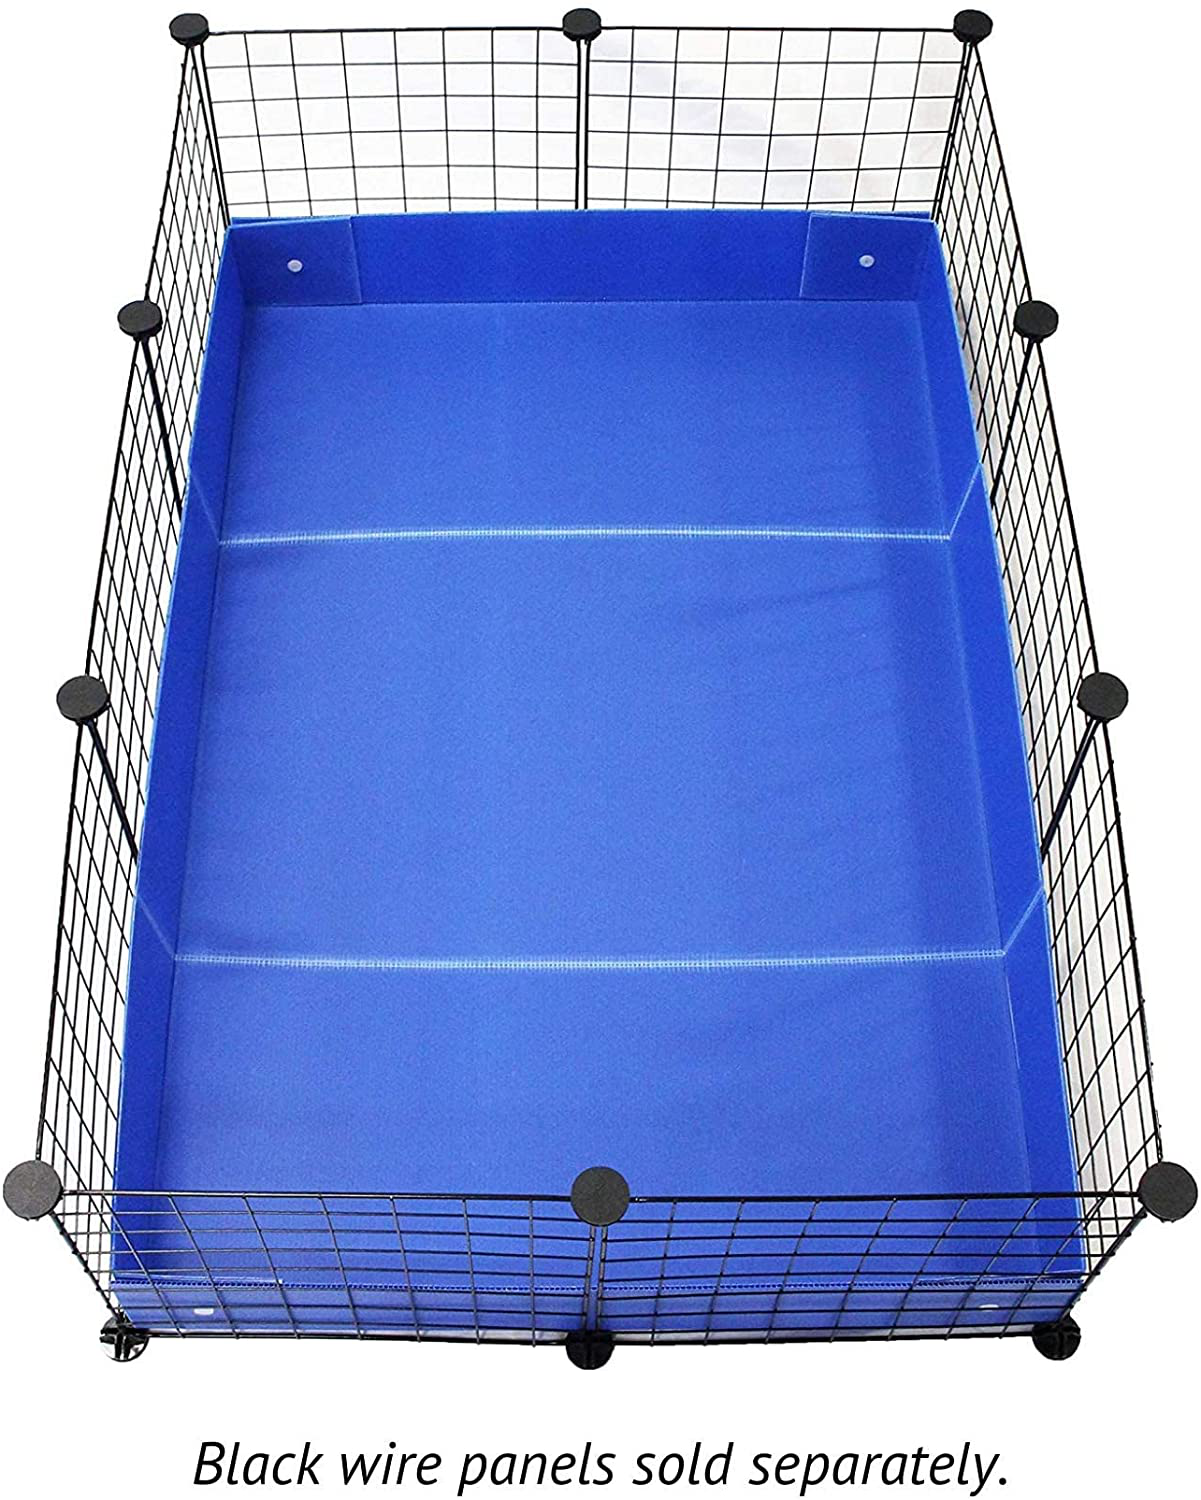 Midlee Corrugated Plastic Guinea Pig Cage Liner- 2X3 Panel Size